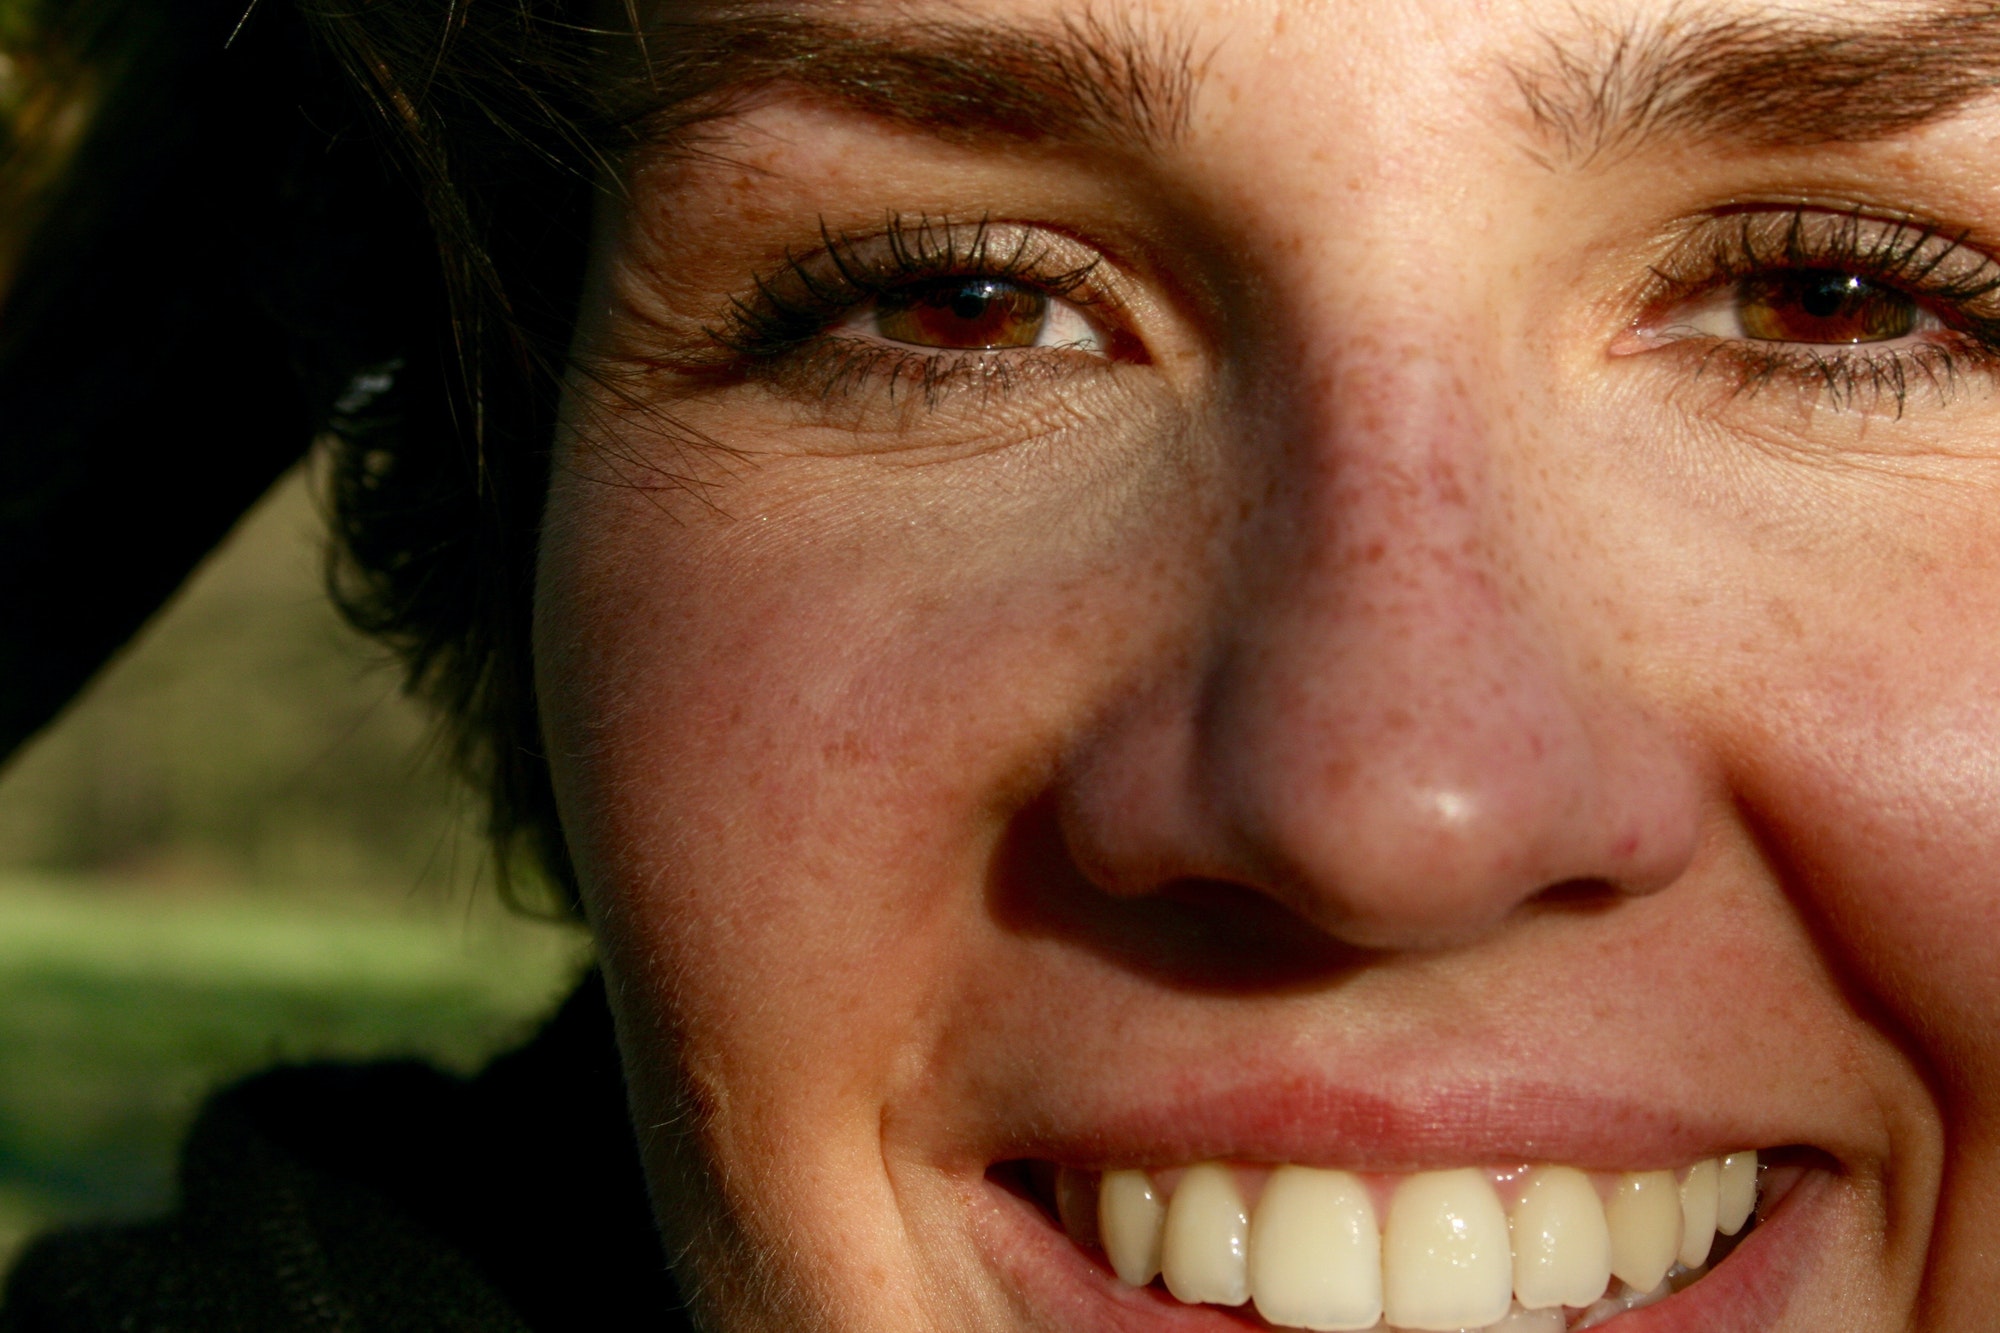 Happy face of a young woman in close-up